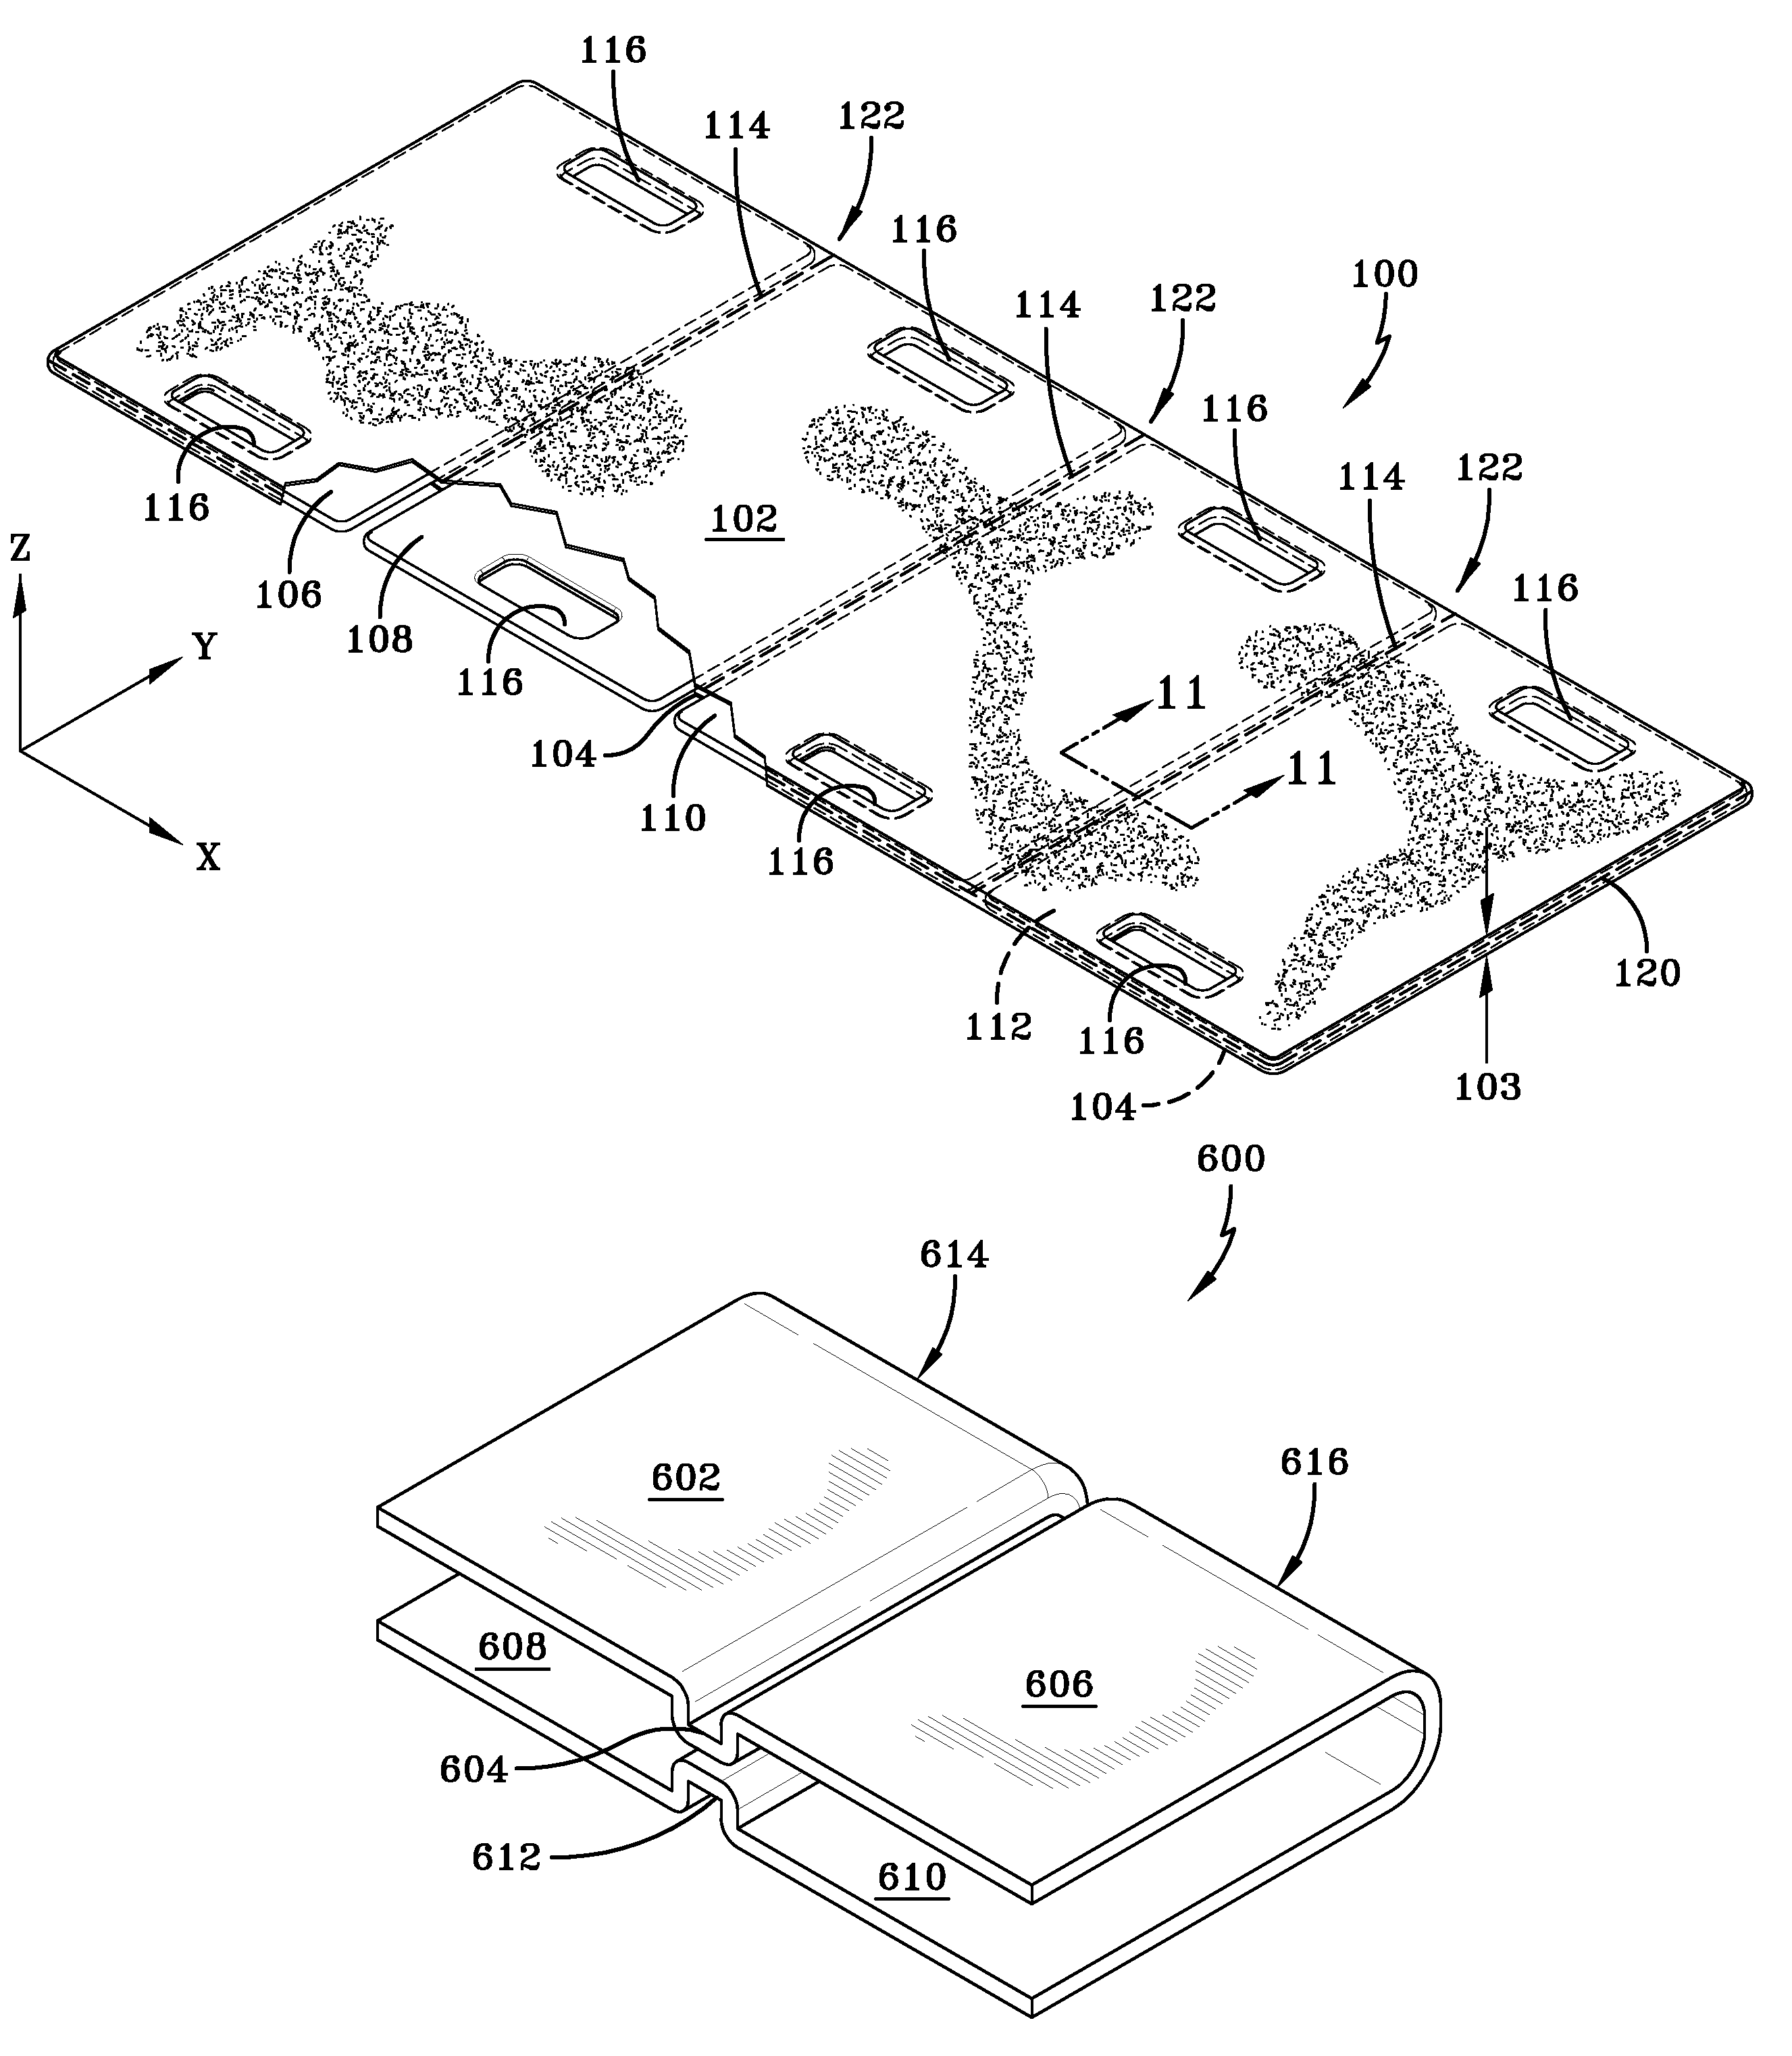 Folding apparatus for transferring a patient